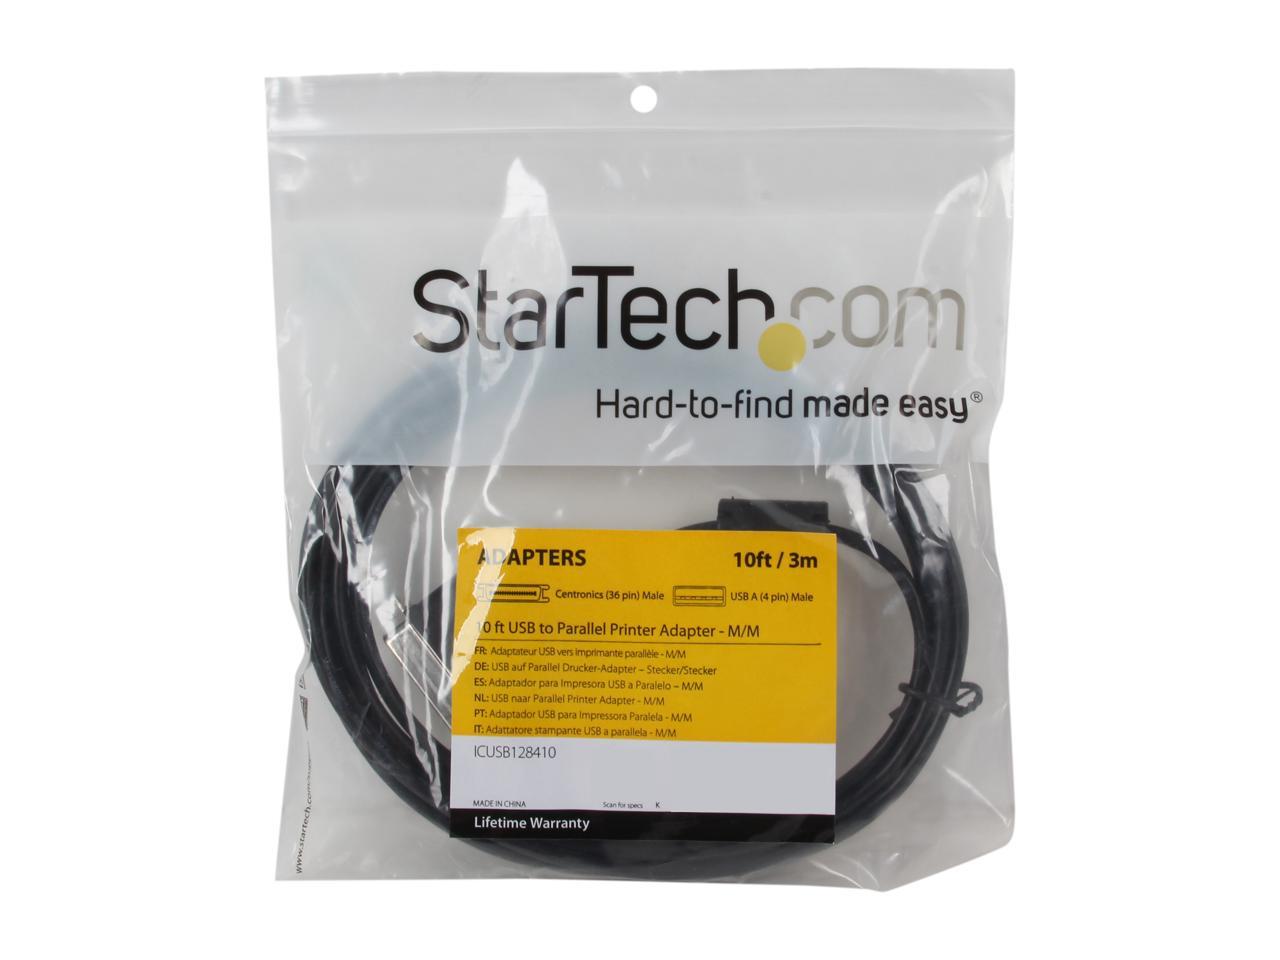 StarTech.com Model ICUSB128410 10 ft. USB to Parallel Printer Adapter - image 3 of 3